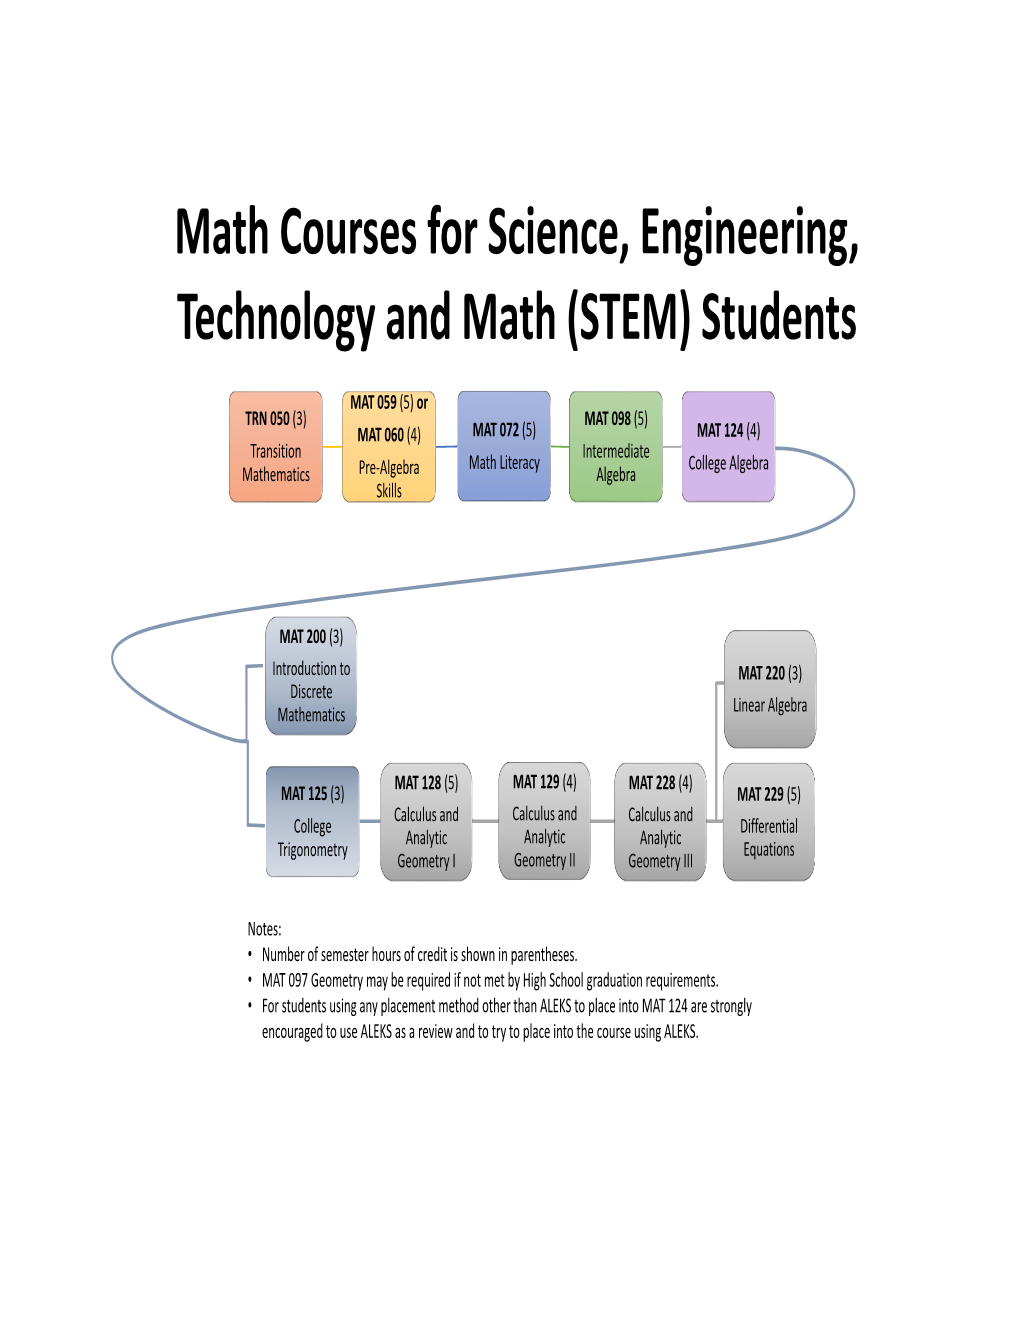 Math Courses for STEM Students.Pdf